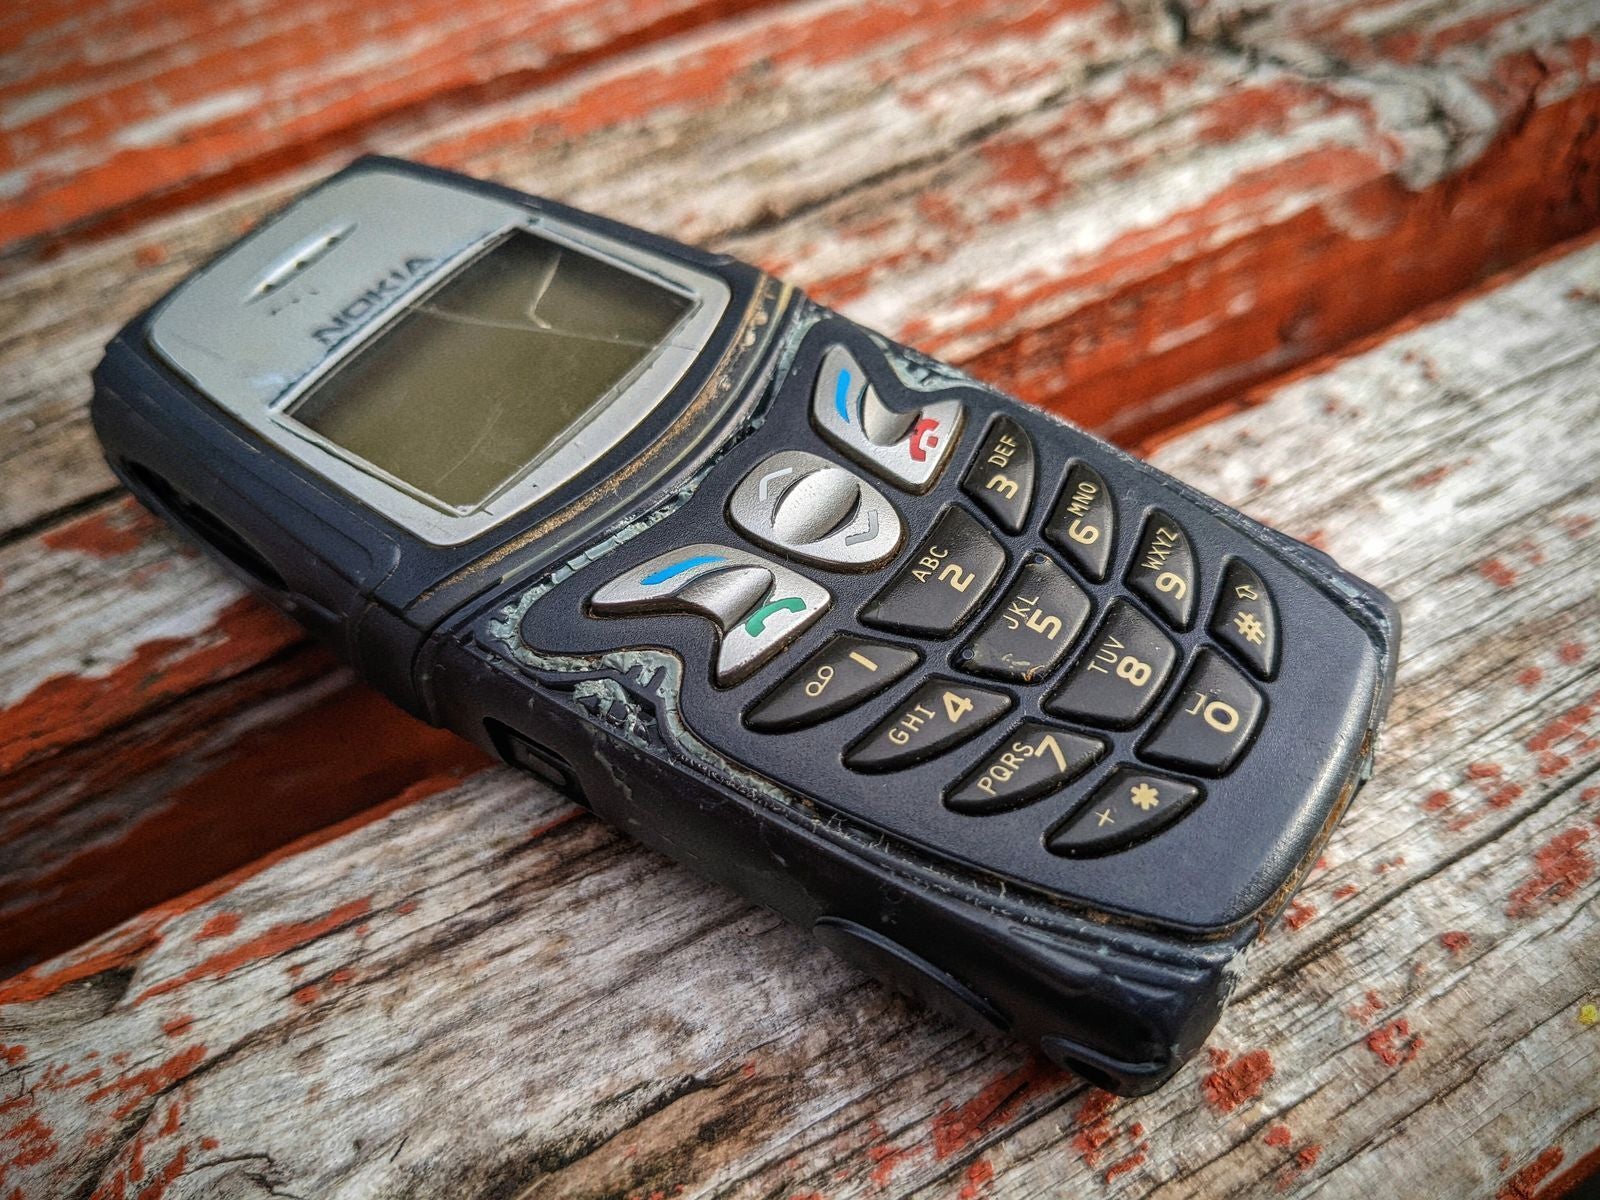 In a far-gone age, touchscreens didn’t exist, so we used numbers to type out letters. - Nokia 3310 might have been indestructible, but my 5210 beat it by a long shot